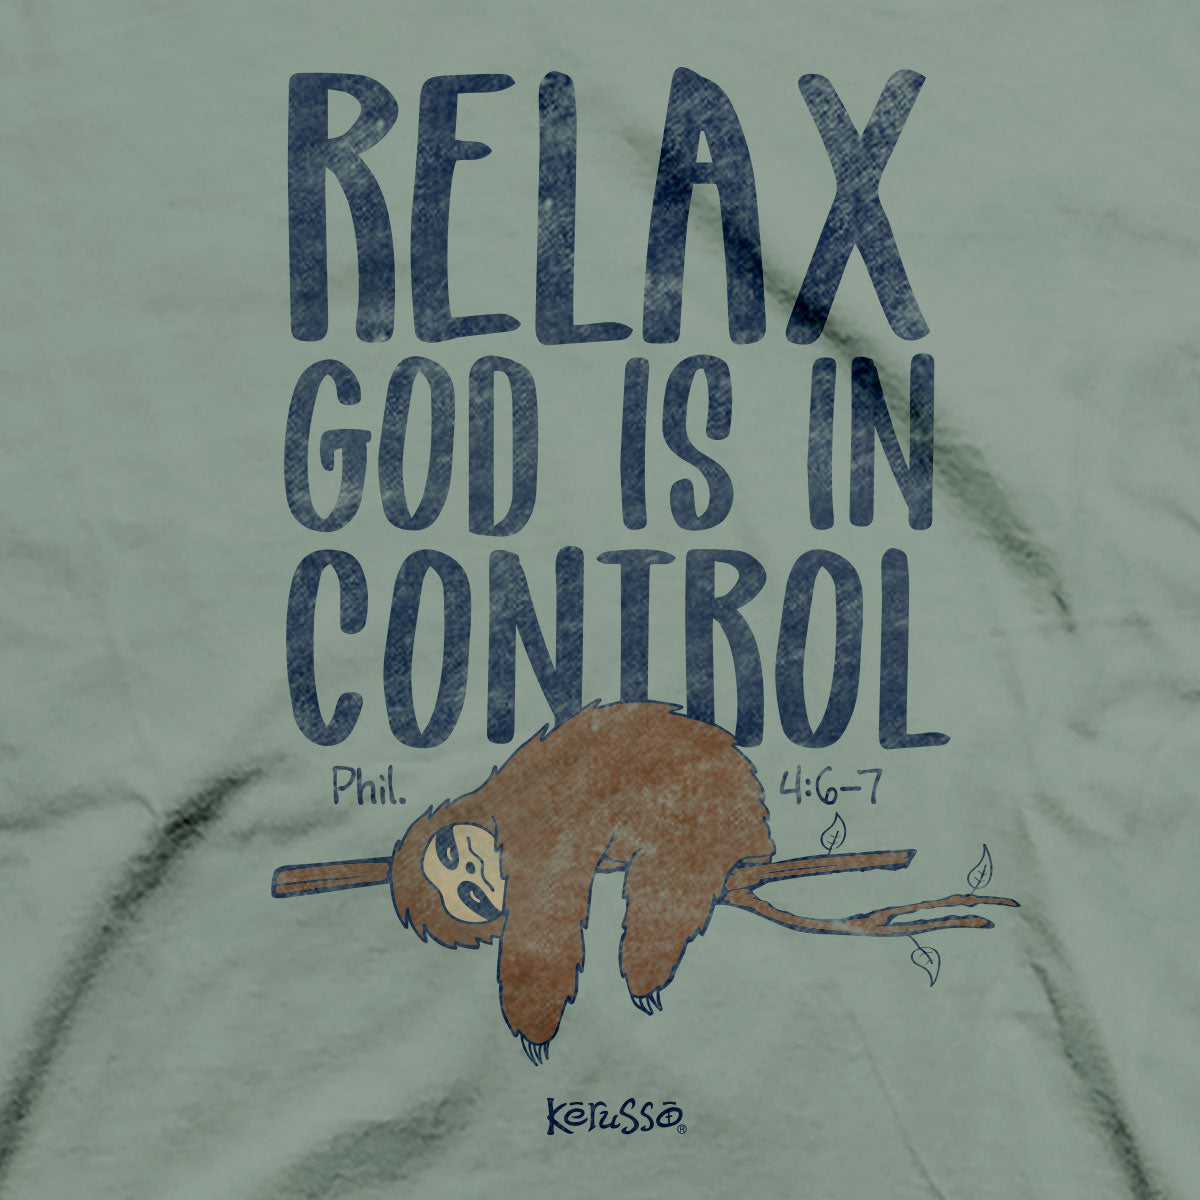 Kerusso Christian T-Shirt God Is In Control Philippians 4:6-7